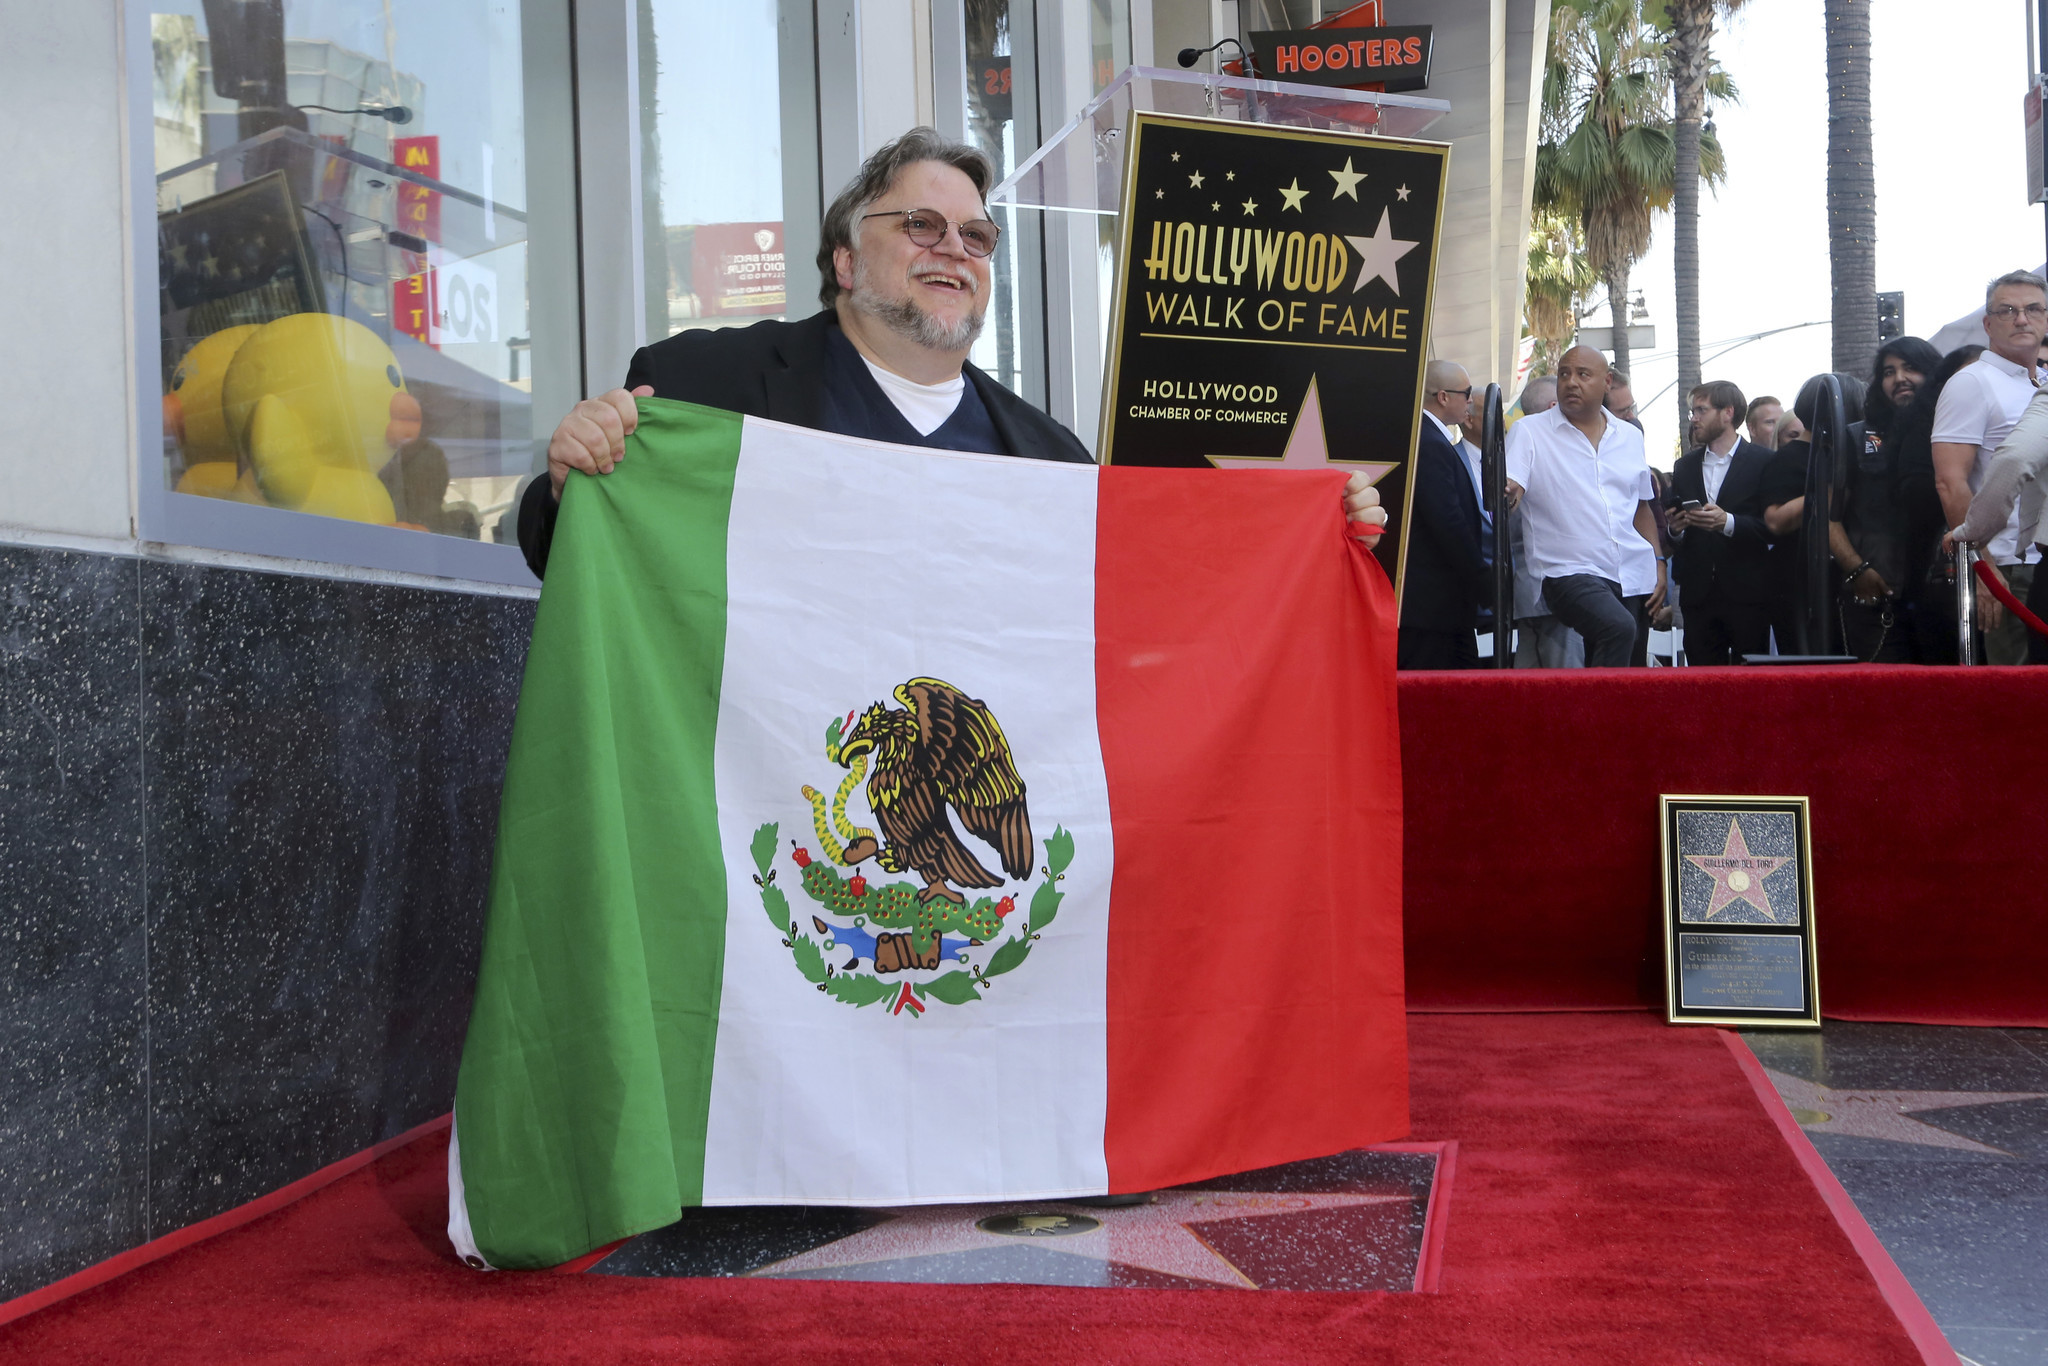 Filmmaker Guillermo del Toro proudly poses with the Mexican flag following his Hollywood Walk of Fame ceremony on August 6, 2019 in Los Angeles, Calif. The Mexican artist, who has brought modern classics including 